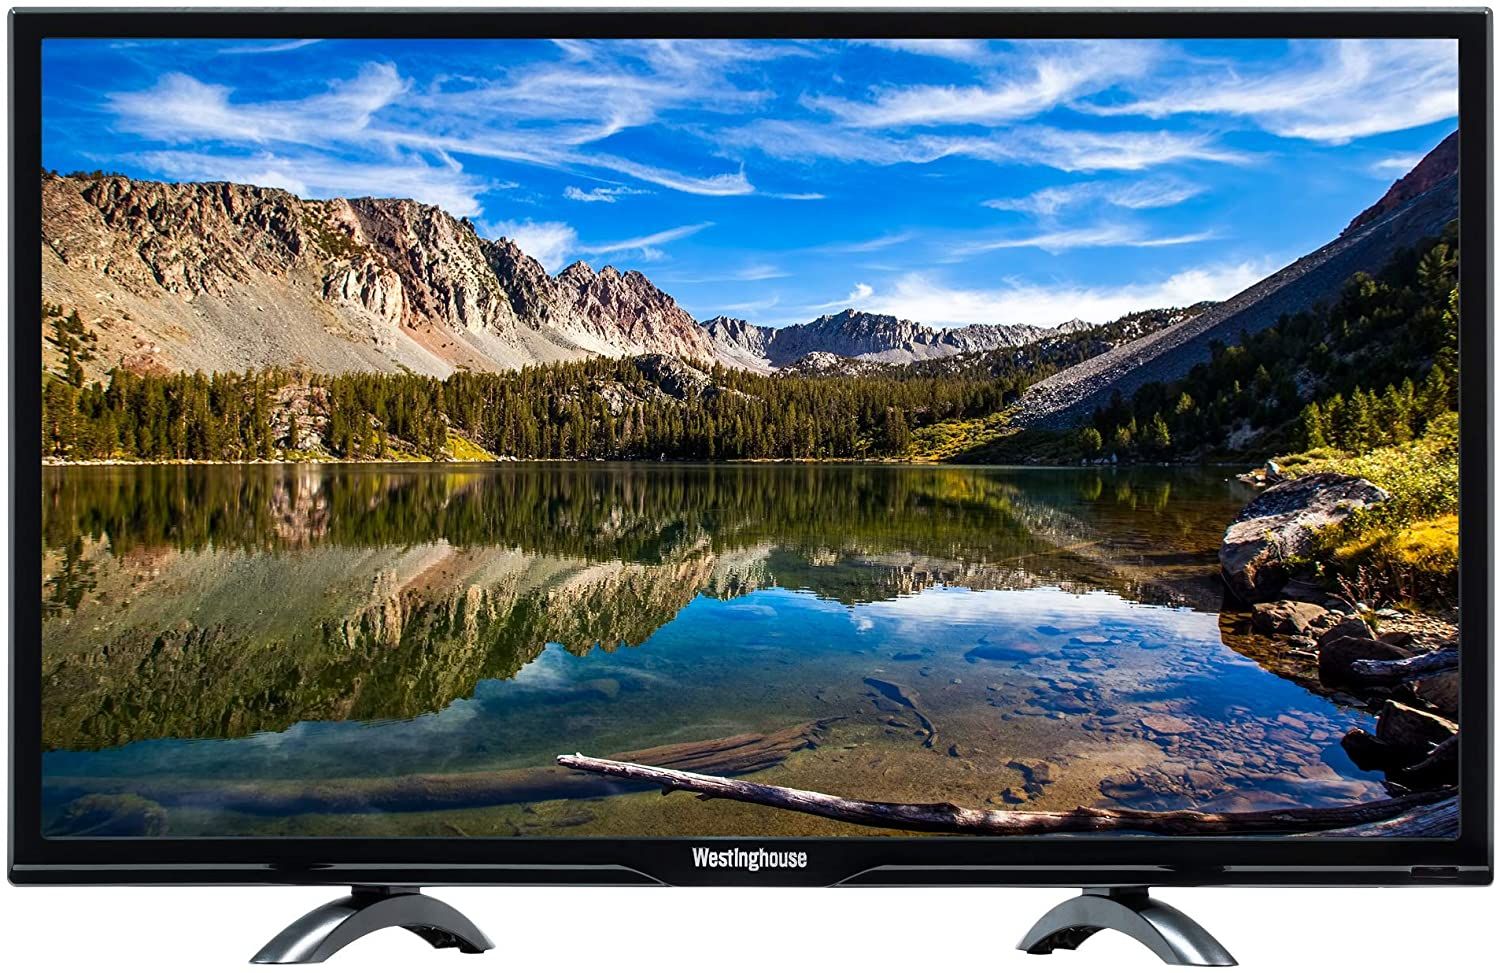 The 7 Best Dumb TVs Without Smart Features